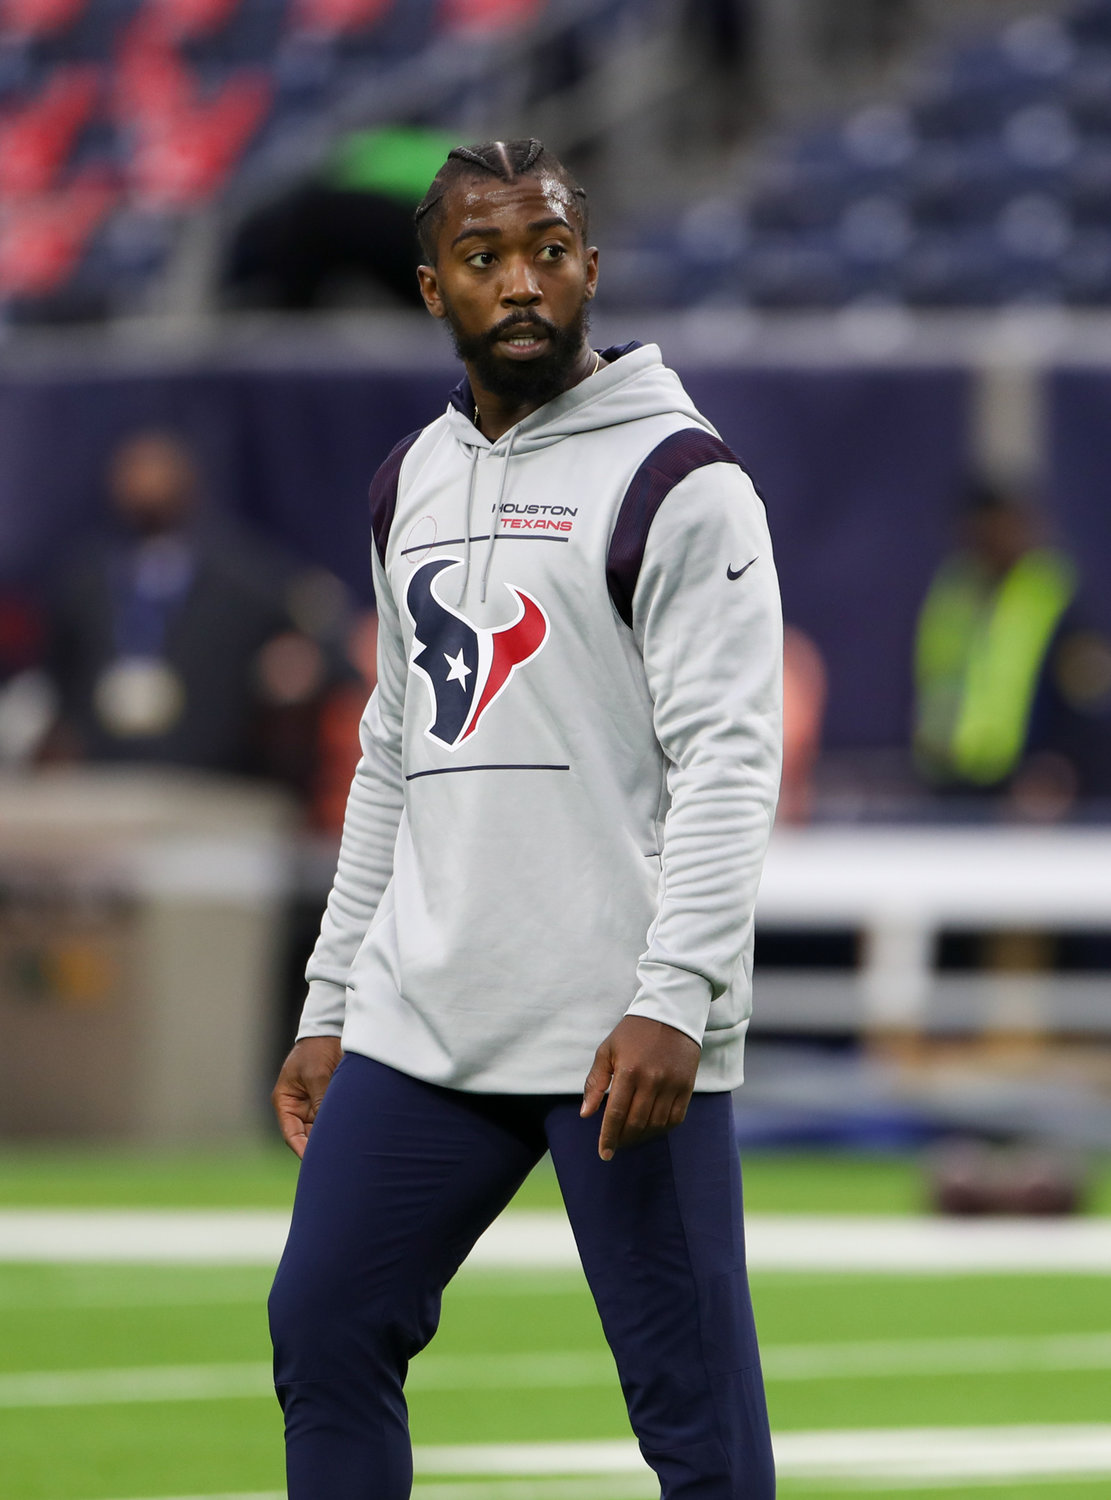 Houston Texans quarterback Tyrod Taylor (5) on the field before the start of an NFL game between the Houston Texans and the New York Jets on November 28, 2021 in Houston, Texas.